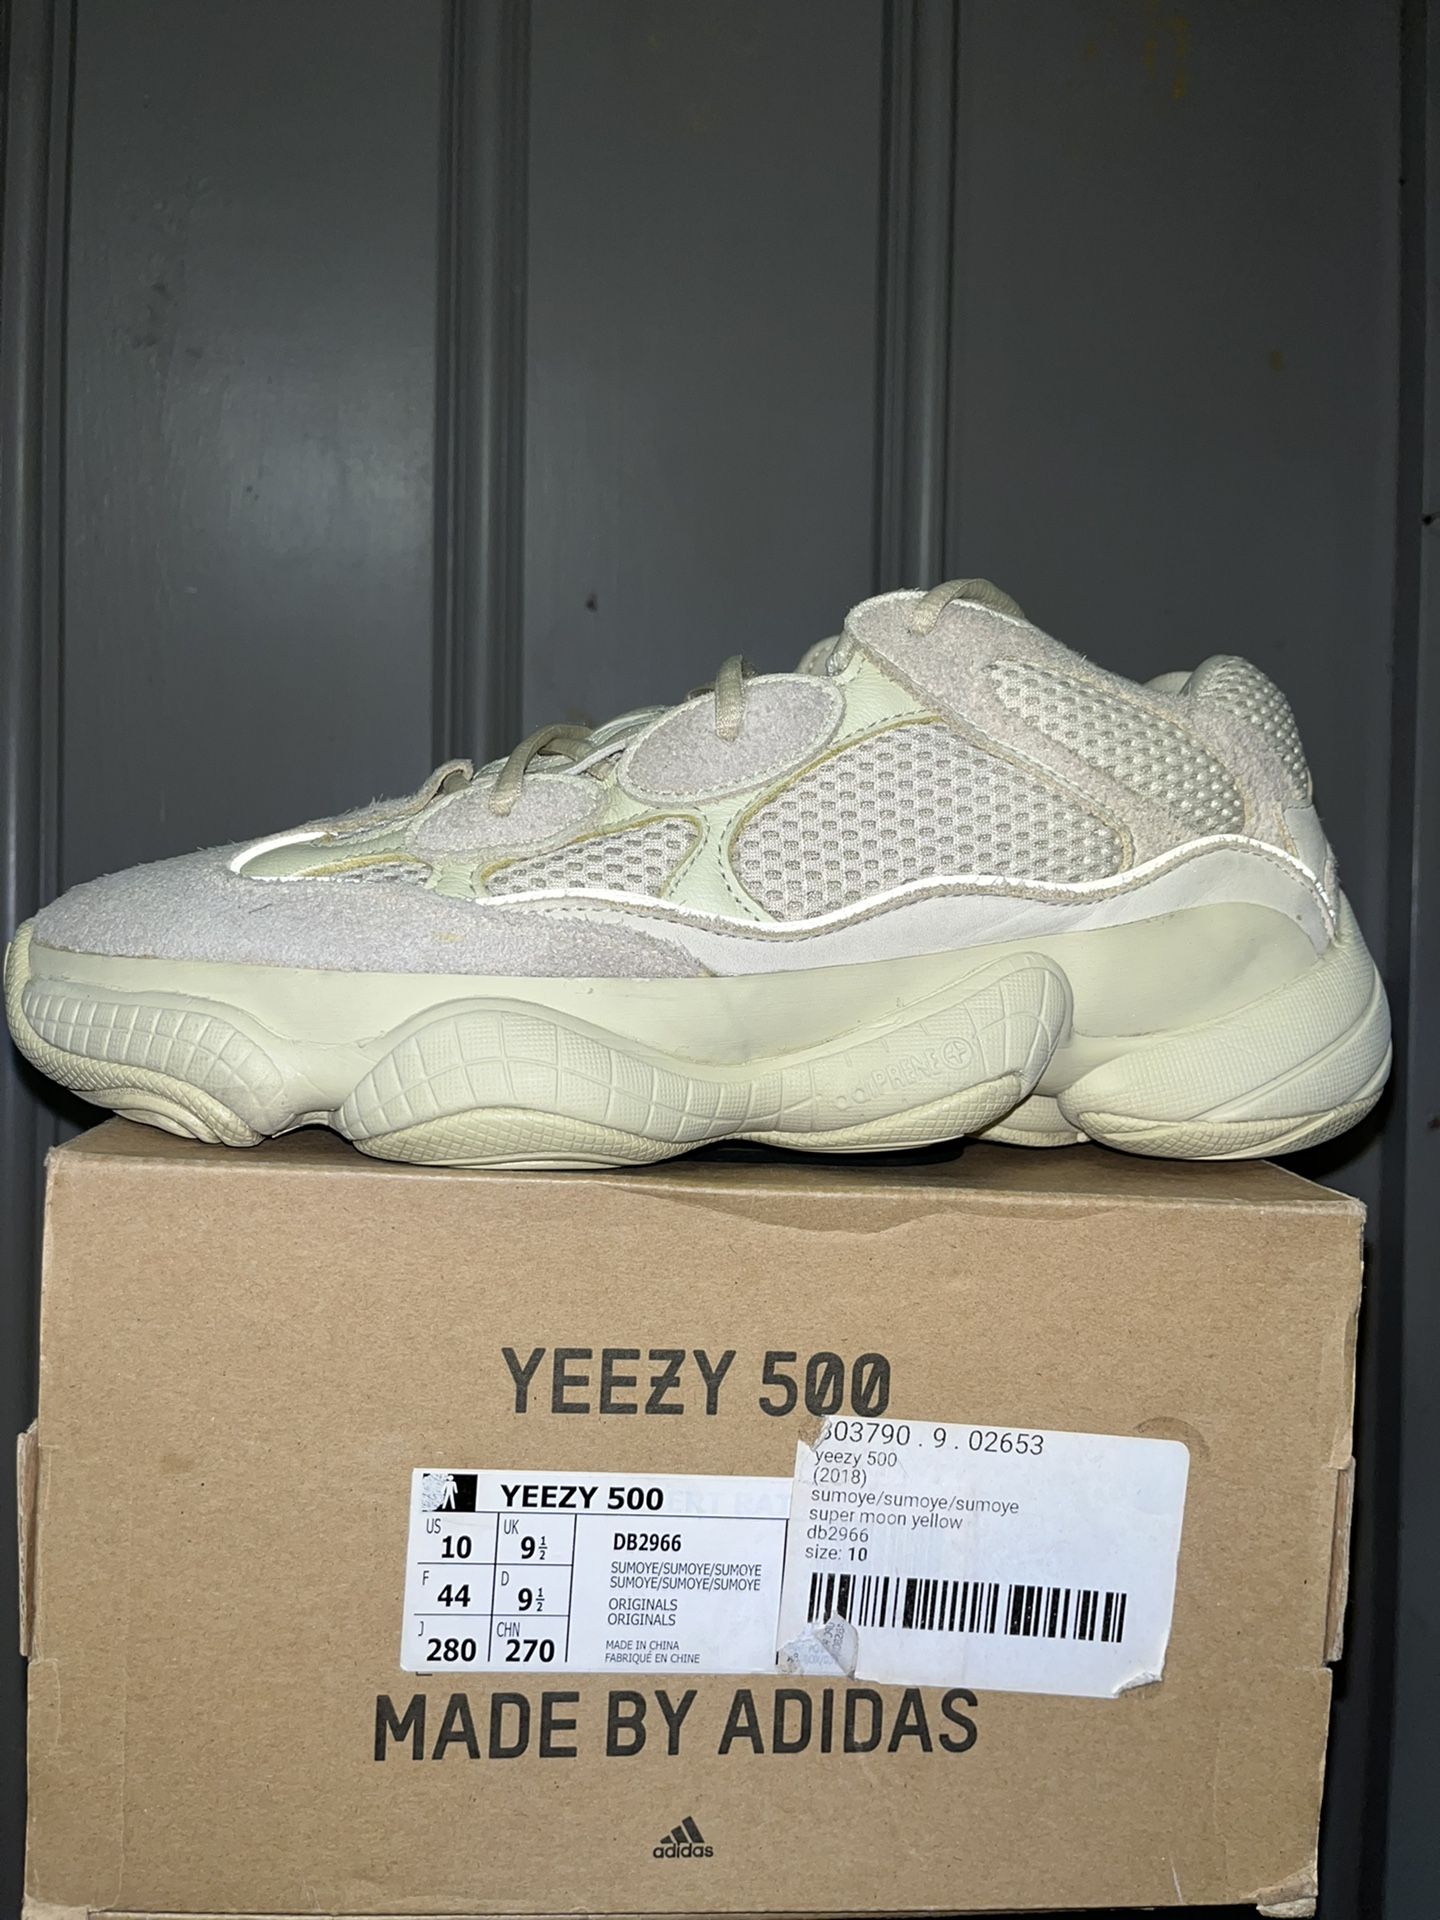 Adidas Yeezy 500 “SUPER-MOON”(Yellow). Size(10). In Mens. Worn In Good Condition. With Og All, Recipt. $210. Cash. Trades Welcome!